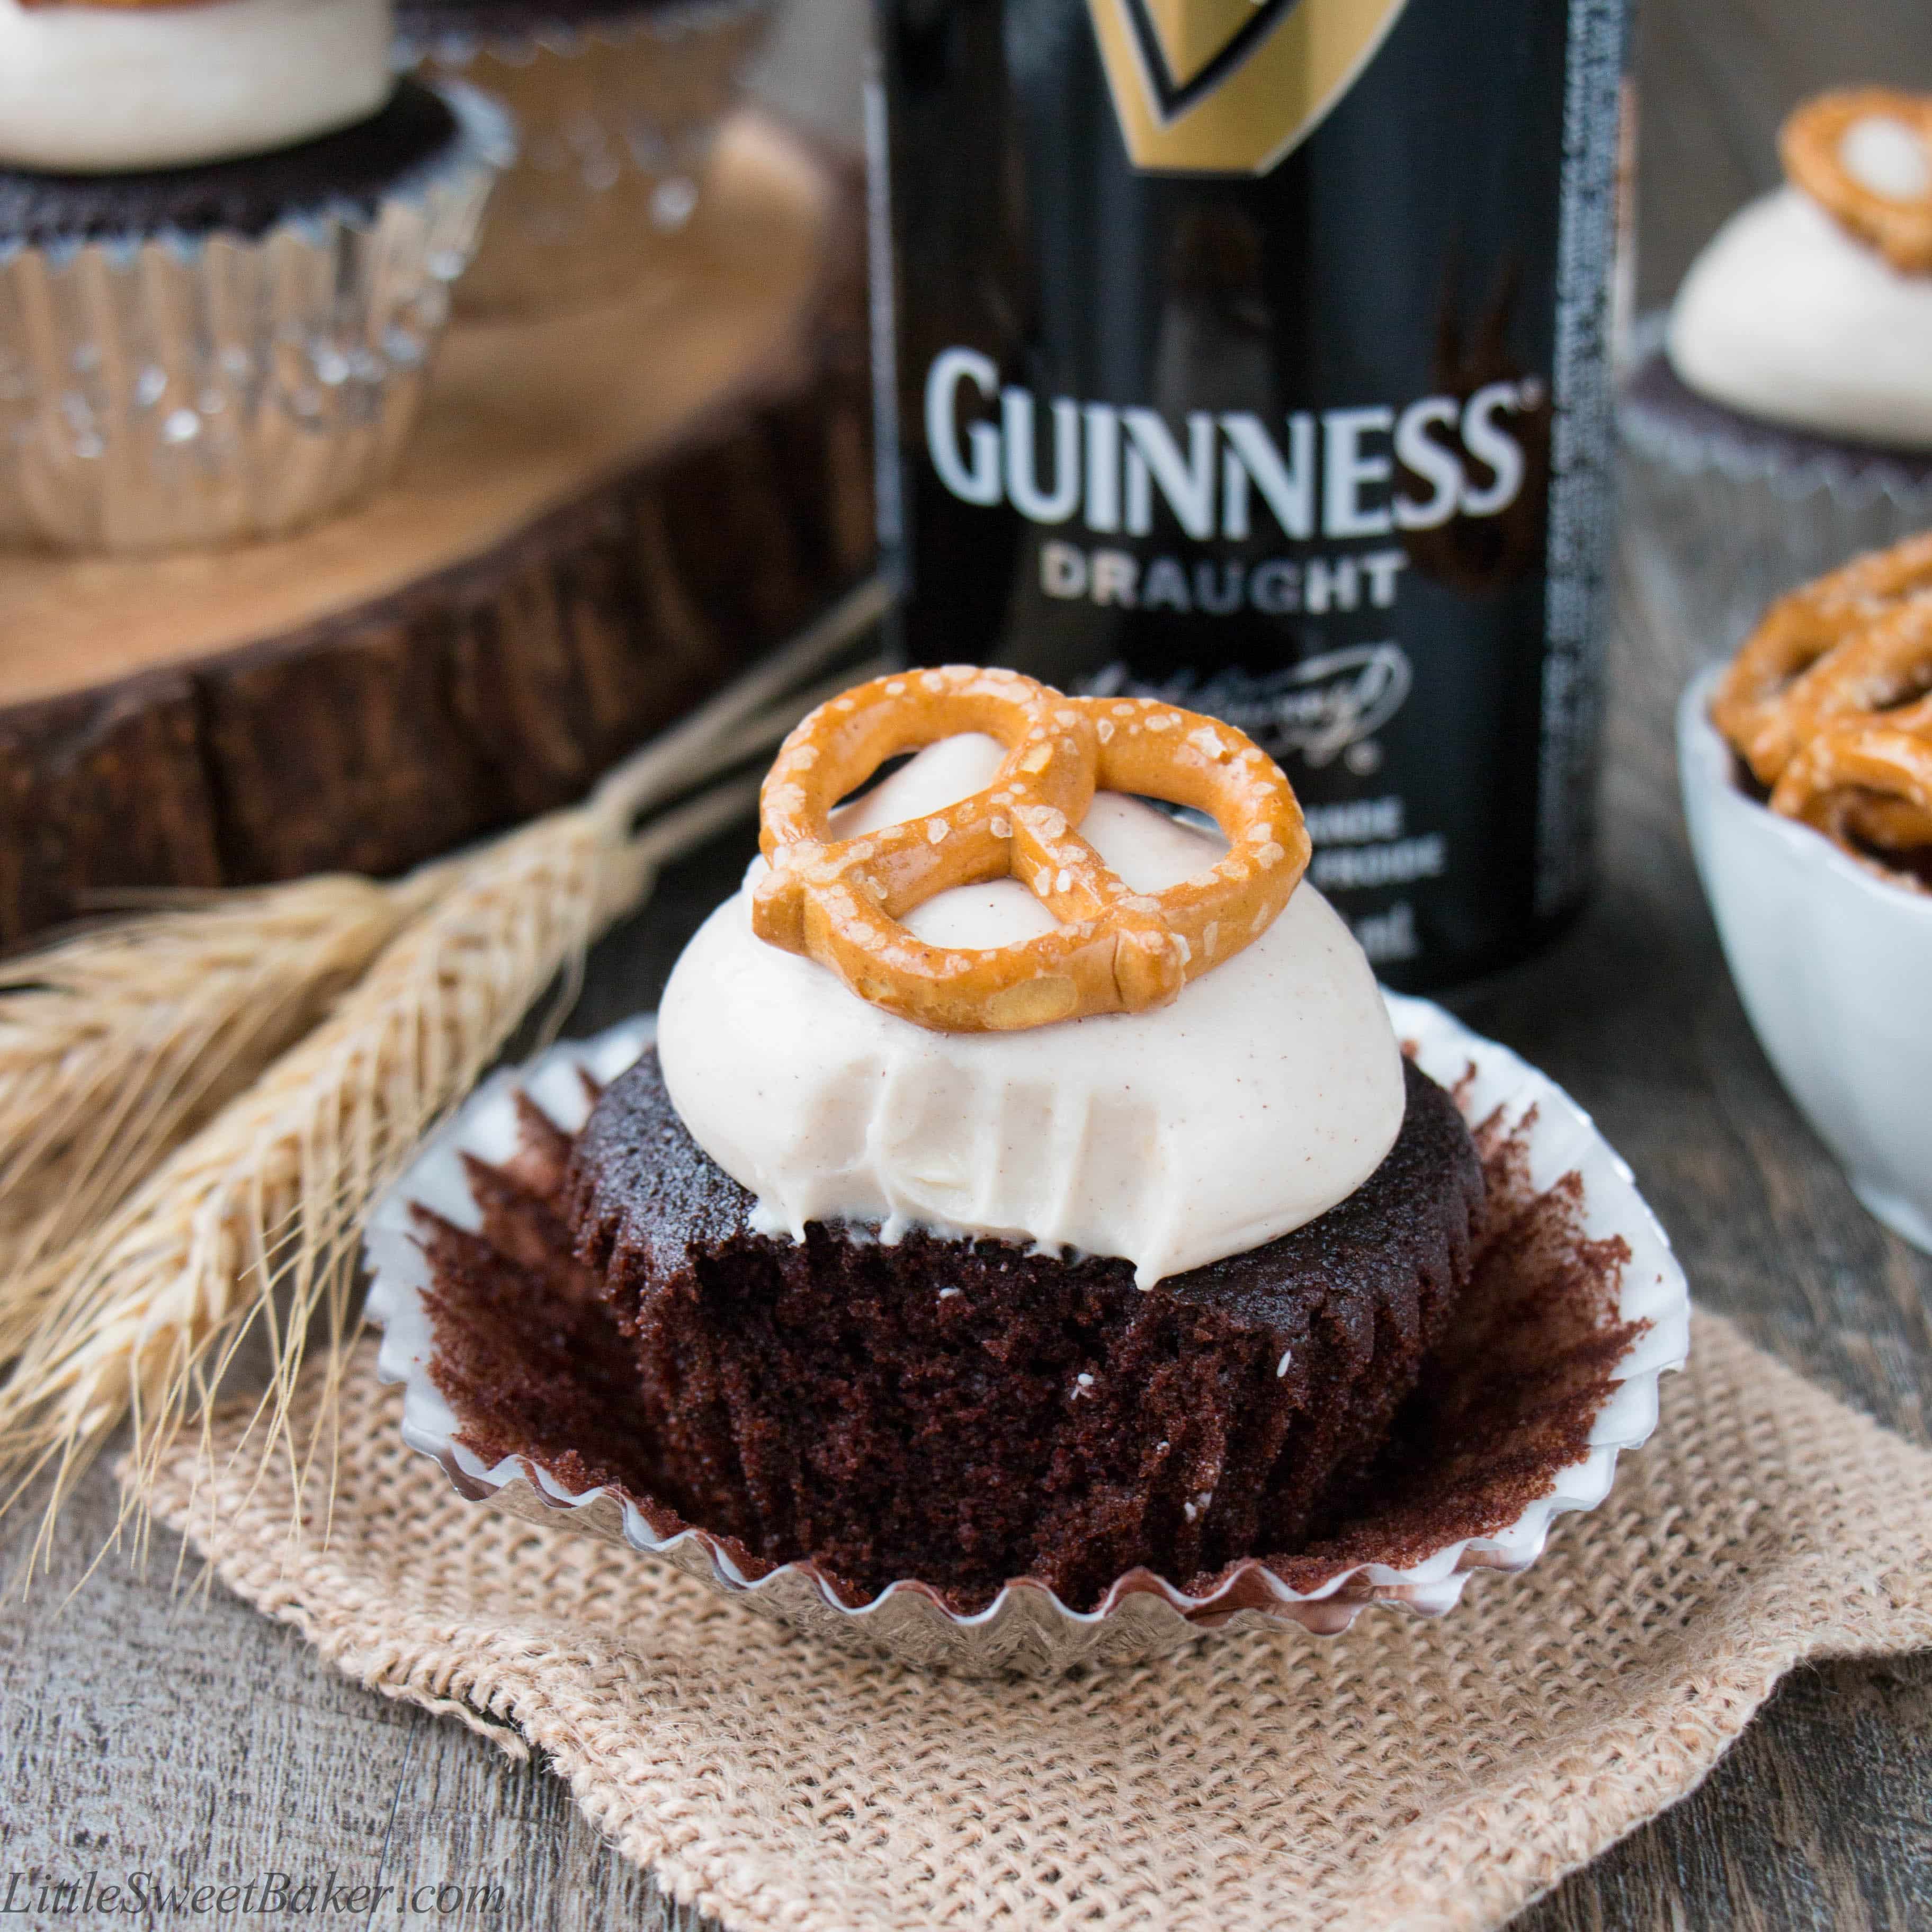 A Guinness cupcake topped with cream cheese frosting and pretzel with a bite taken out.